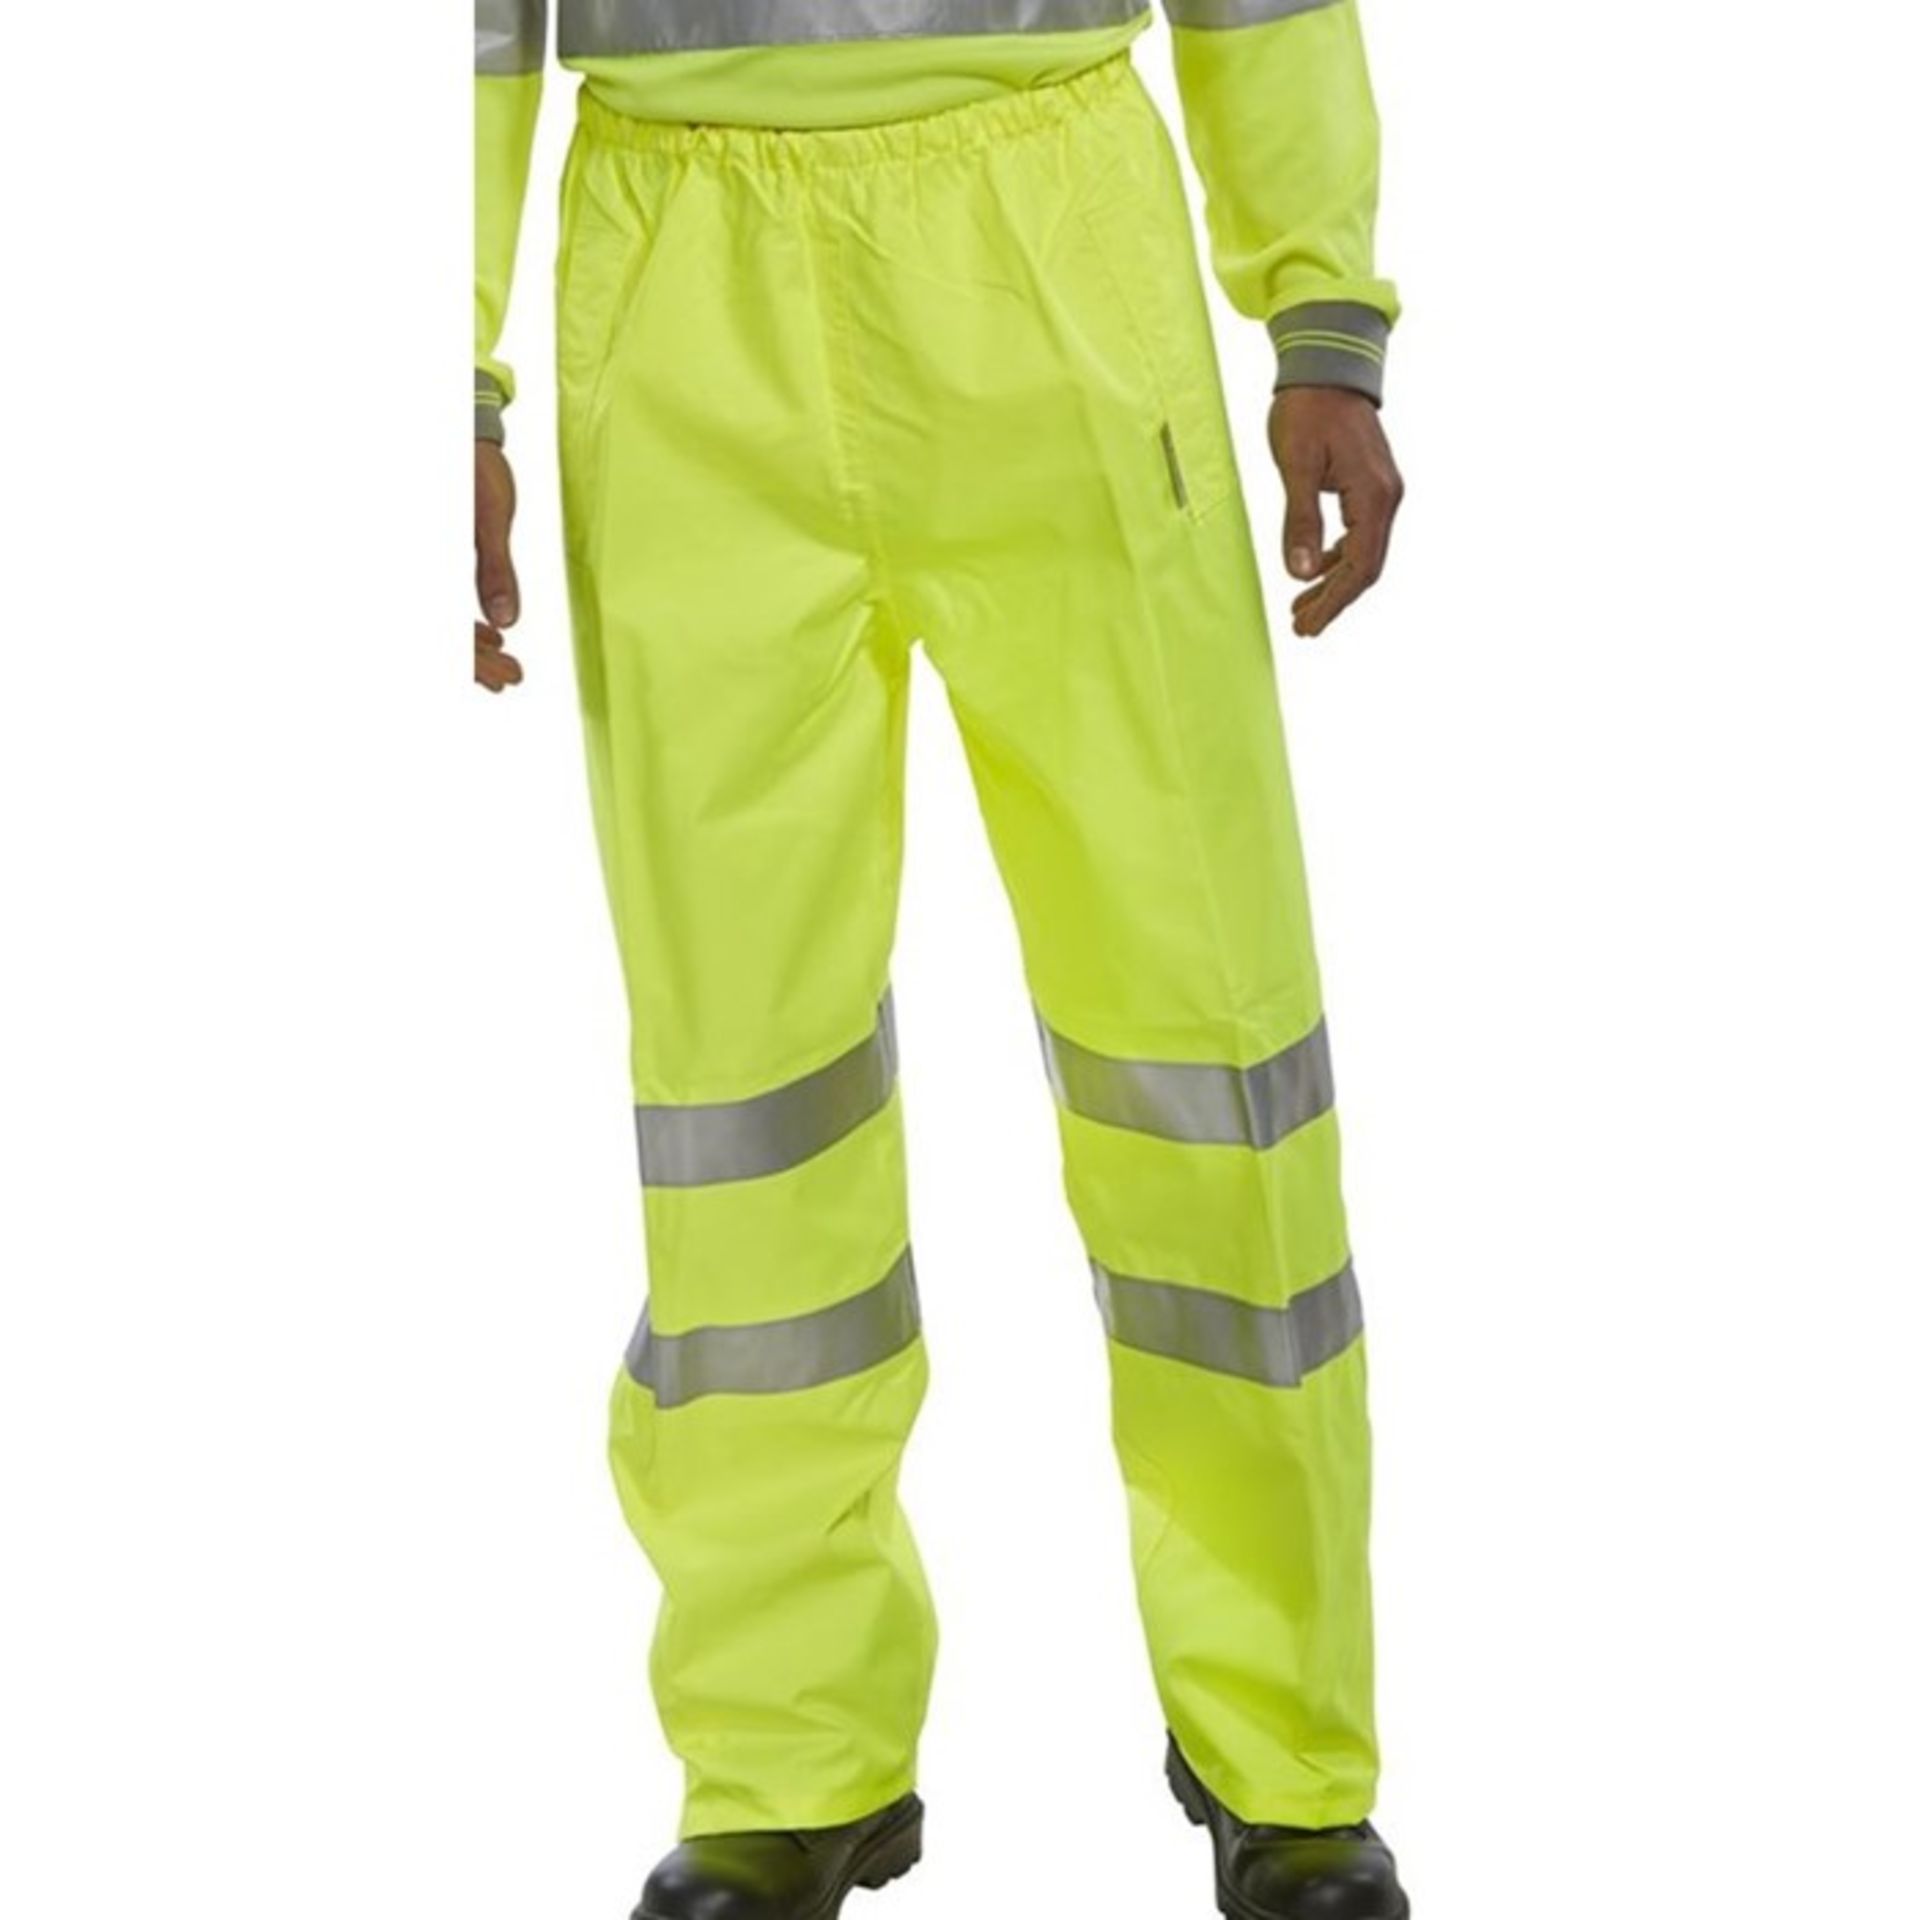 2 BAGGED BSEEN BIRKDALE HI-VIS TROUSERS / SIZE L / PN - 441 / RRP £62.34 (VIEWING HIGHLY